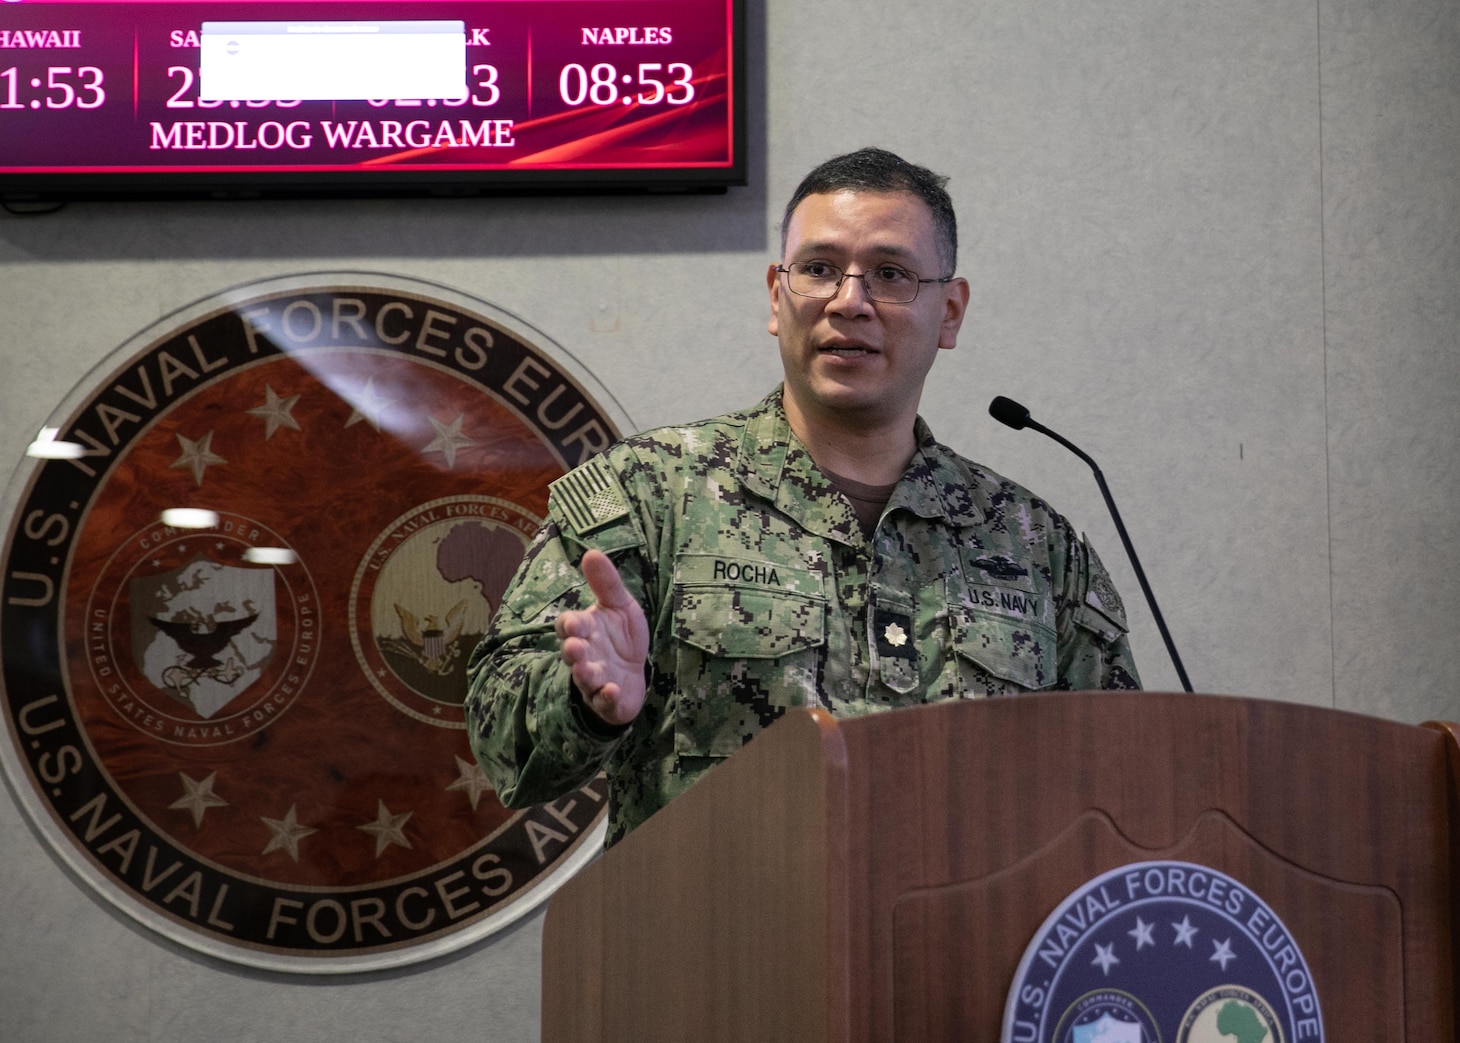 NAVAL SUPPORT ACTIVITY NAPLES, Italy - U.S. Naval Forces Europe and Africa (NAVEUR-NAVAF) hosted the 2024 Medical Logistics (MEDLOG) War game led by the research and analysis organization Center for Naval Analyses (CNA), Feb. 6-8, 2024.